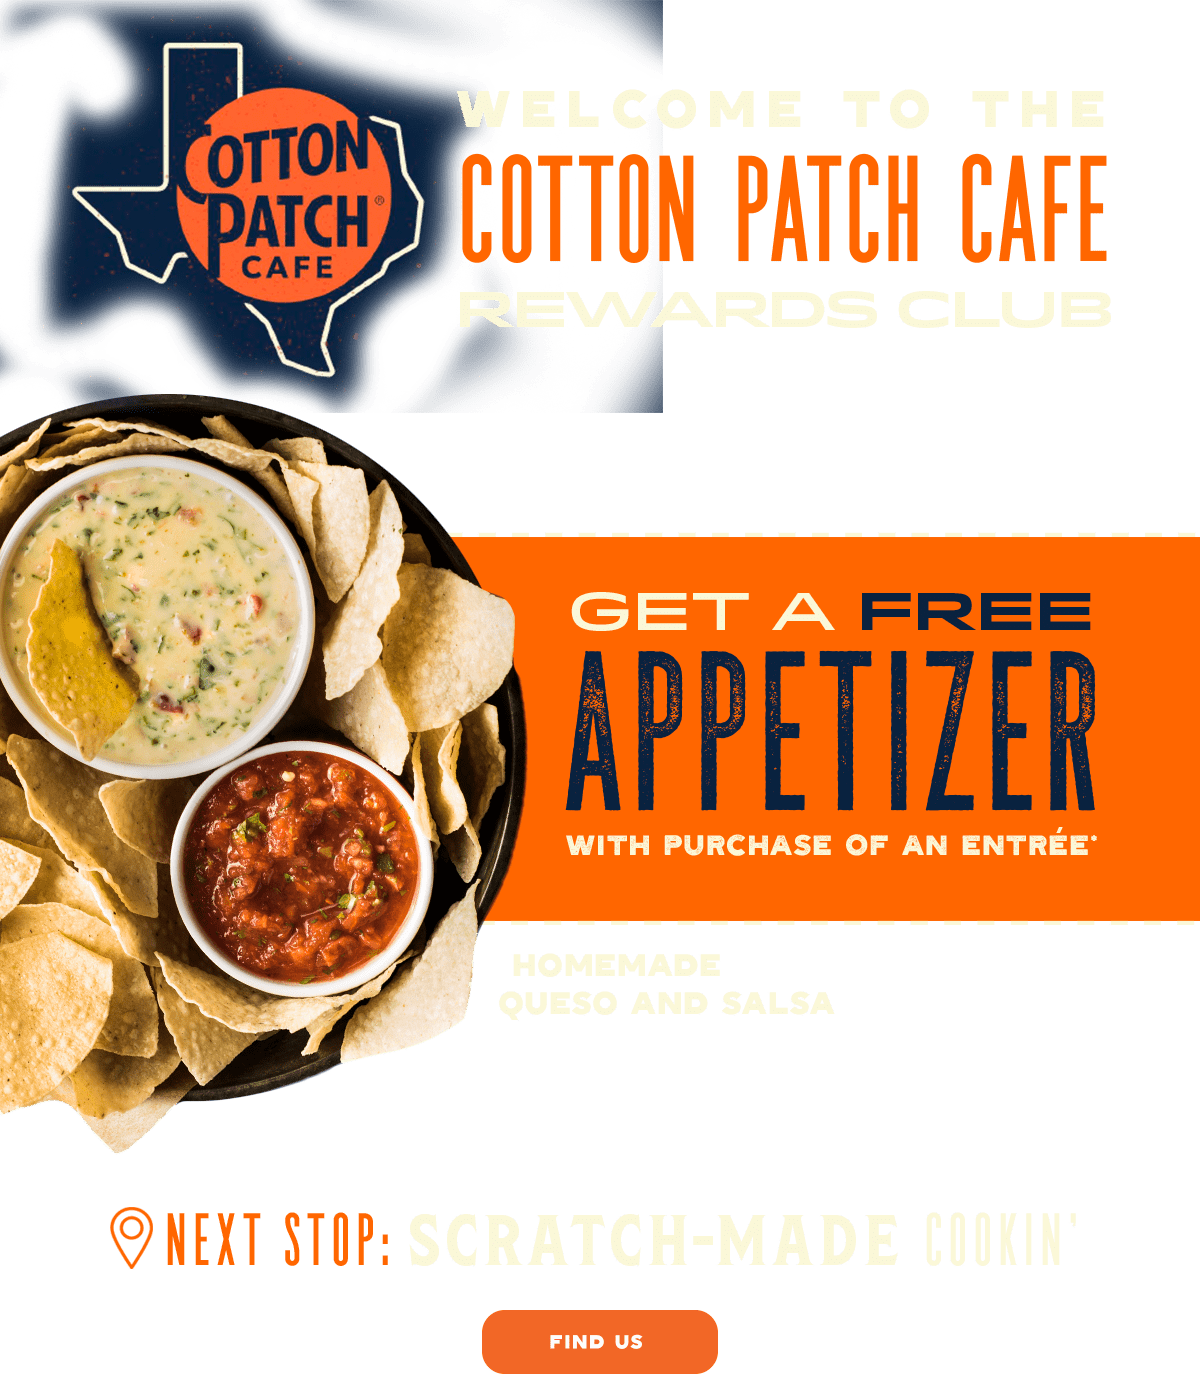 Welcome to the Cotton Patch Cafe Rewards Club!